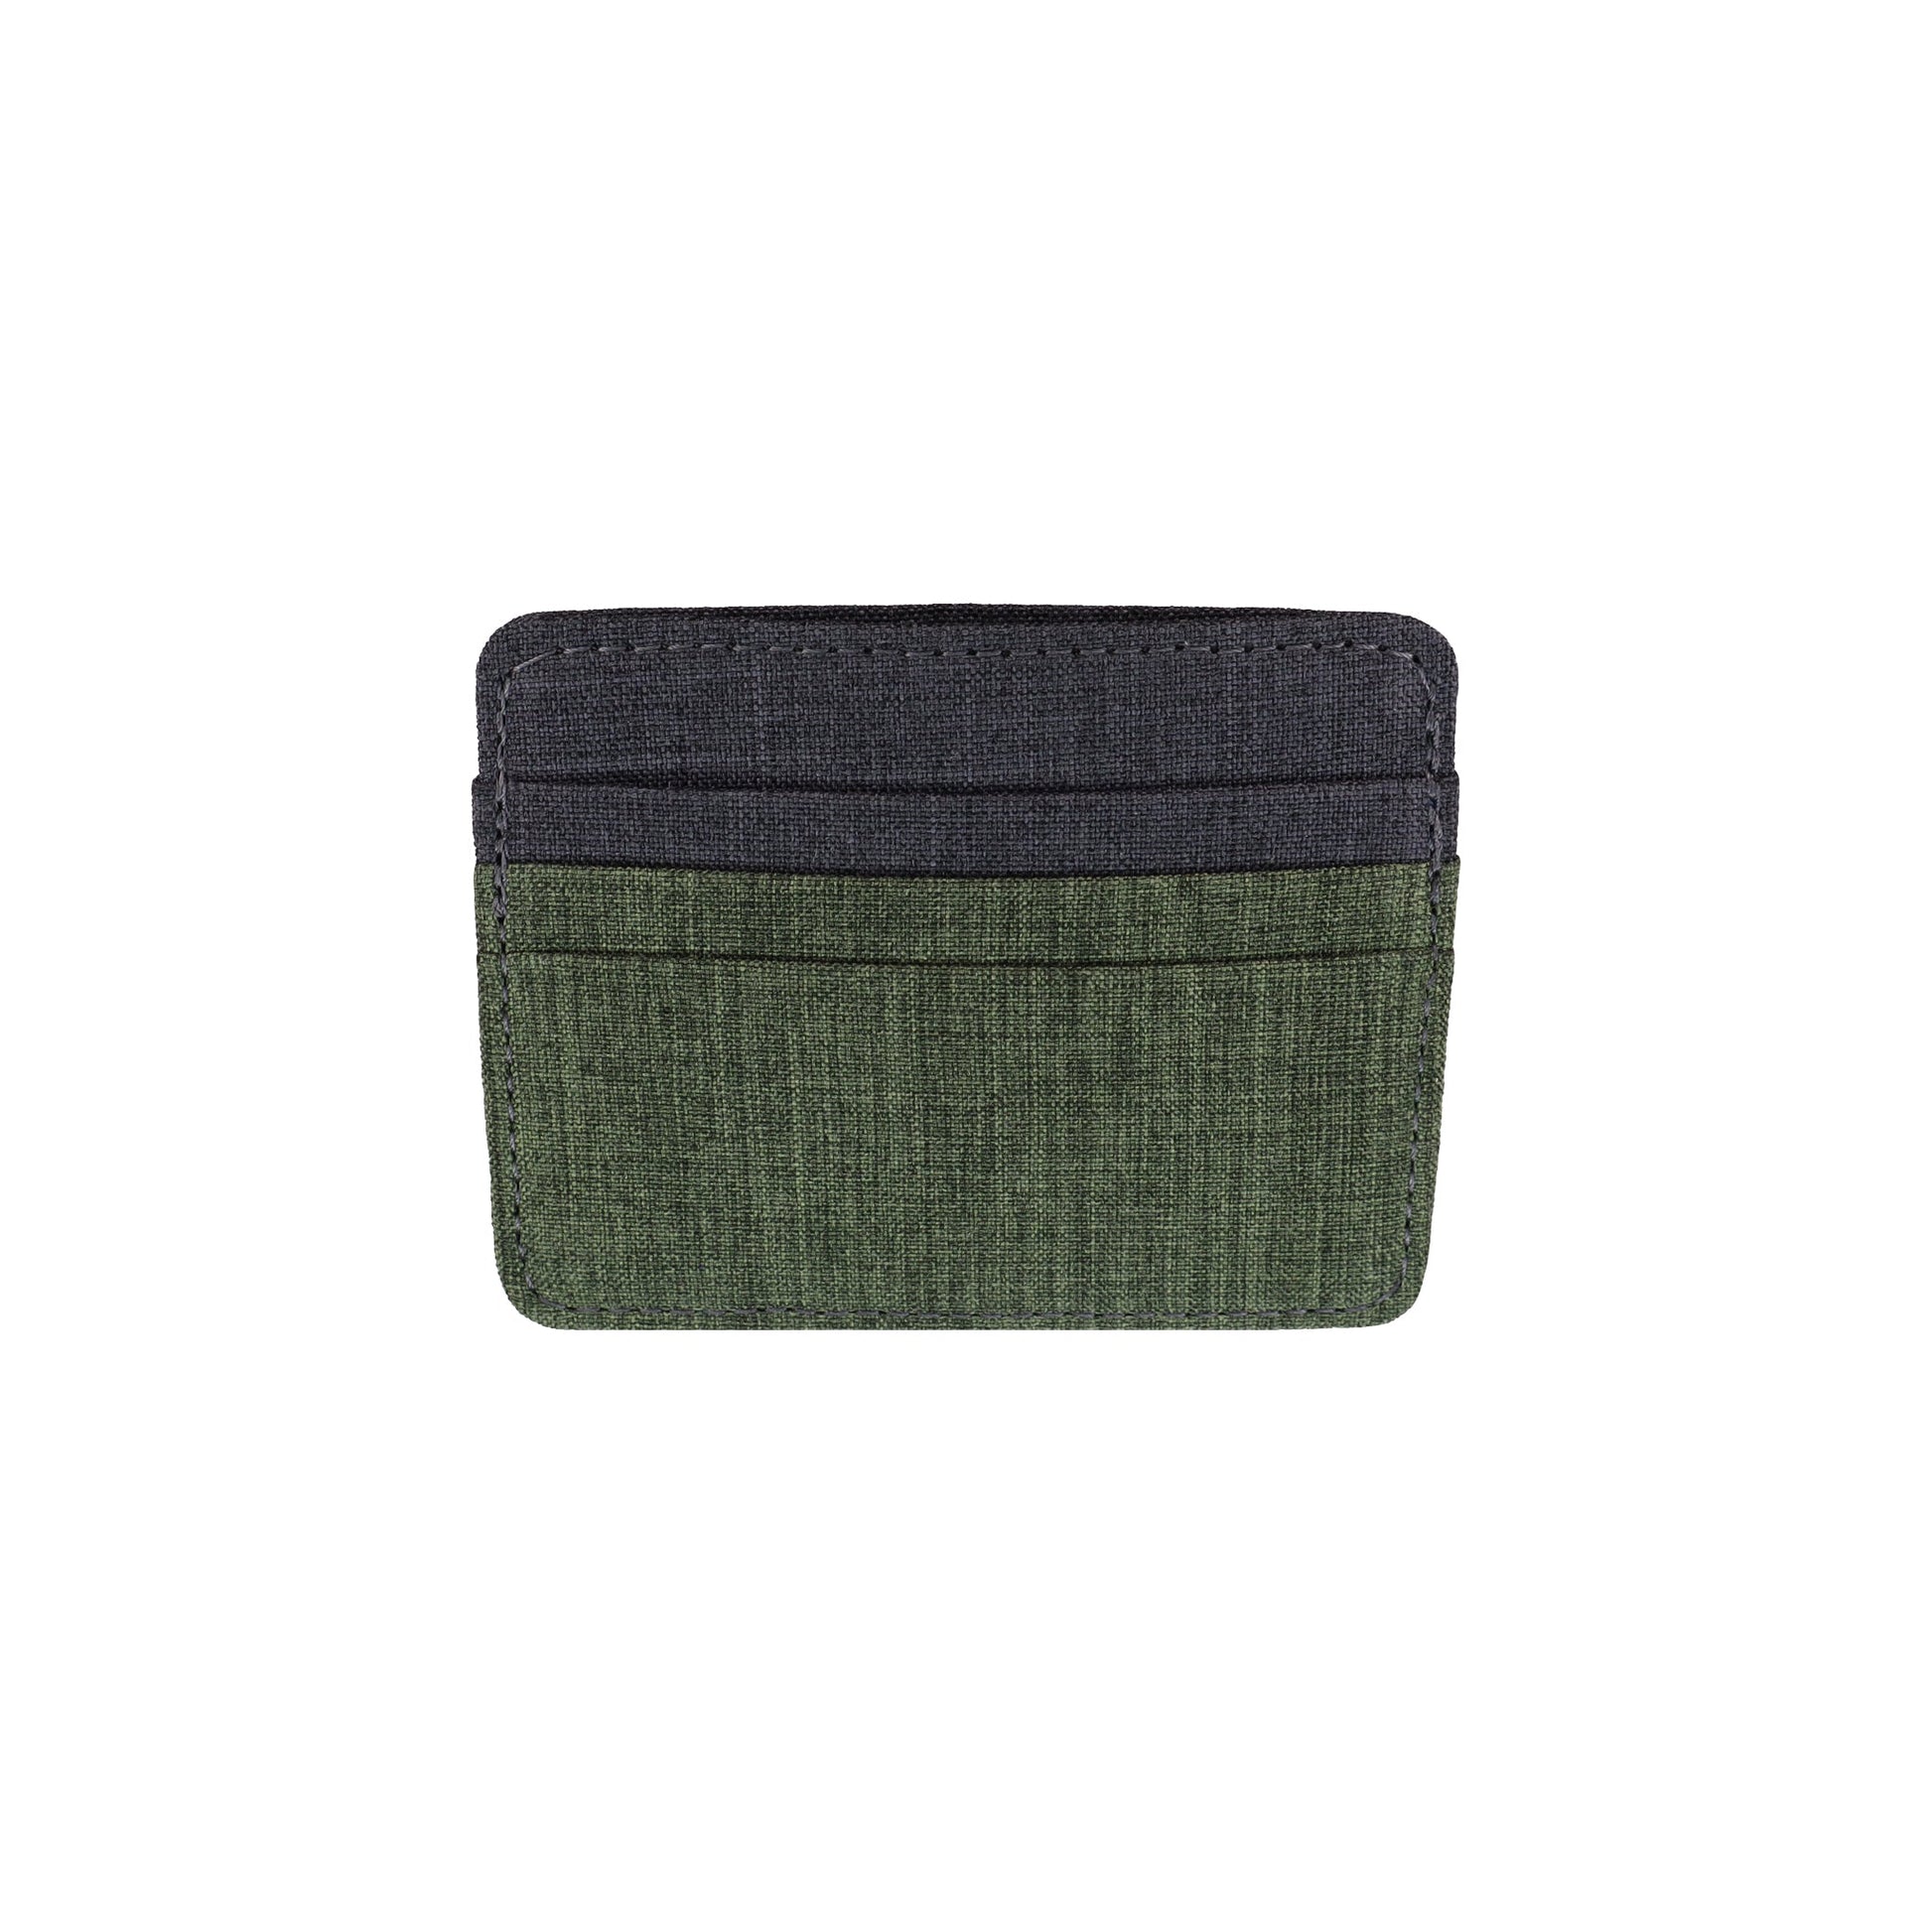 Green and Gray Polyester Fabric Card Holder Wallet